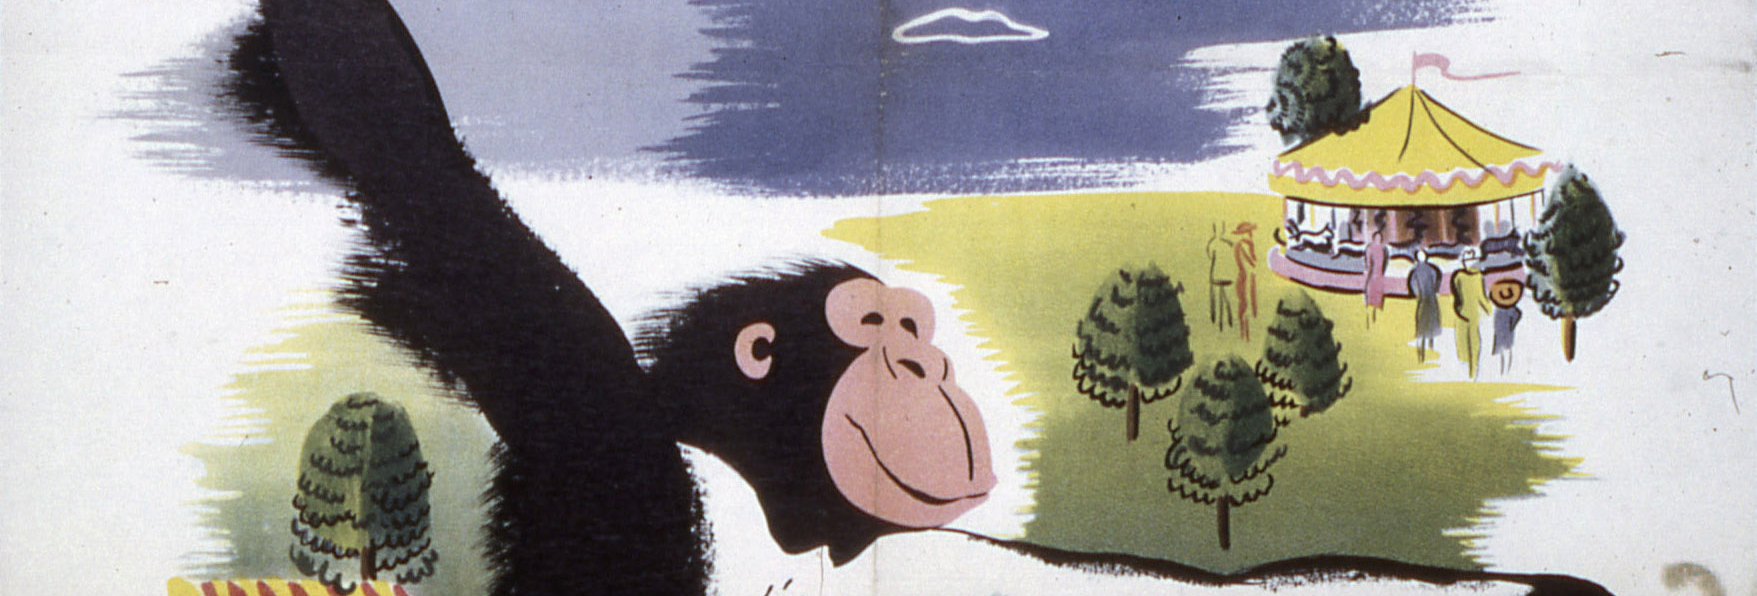 Come to the Zoo' Poster circa 1950s